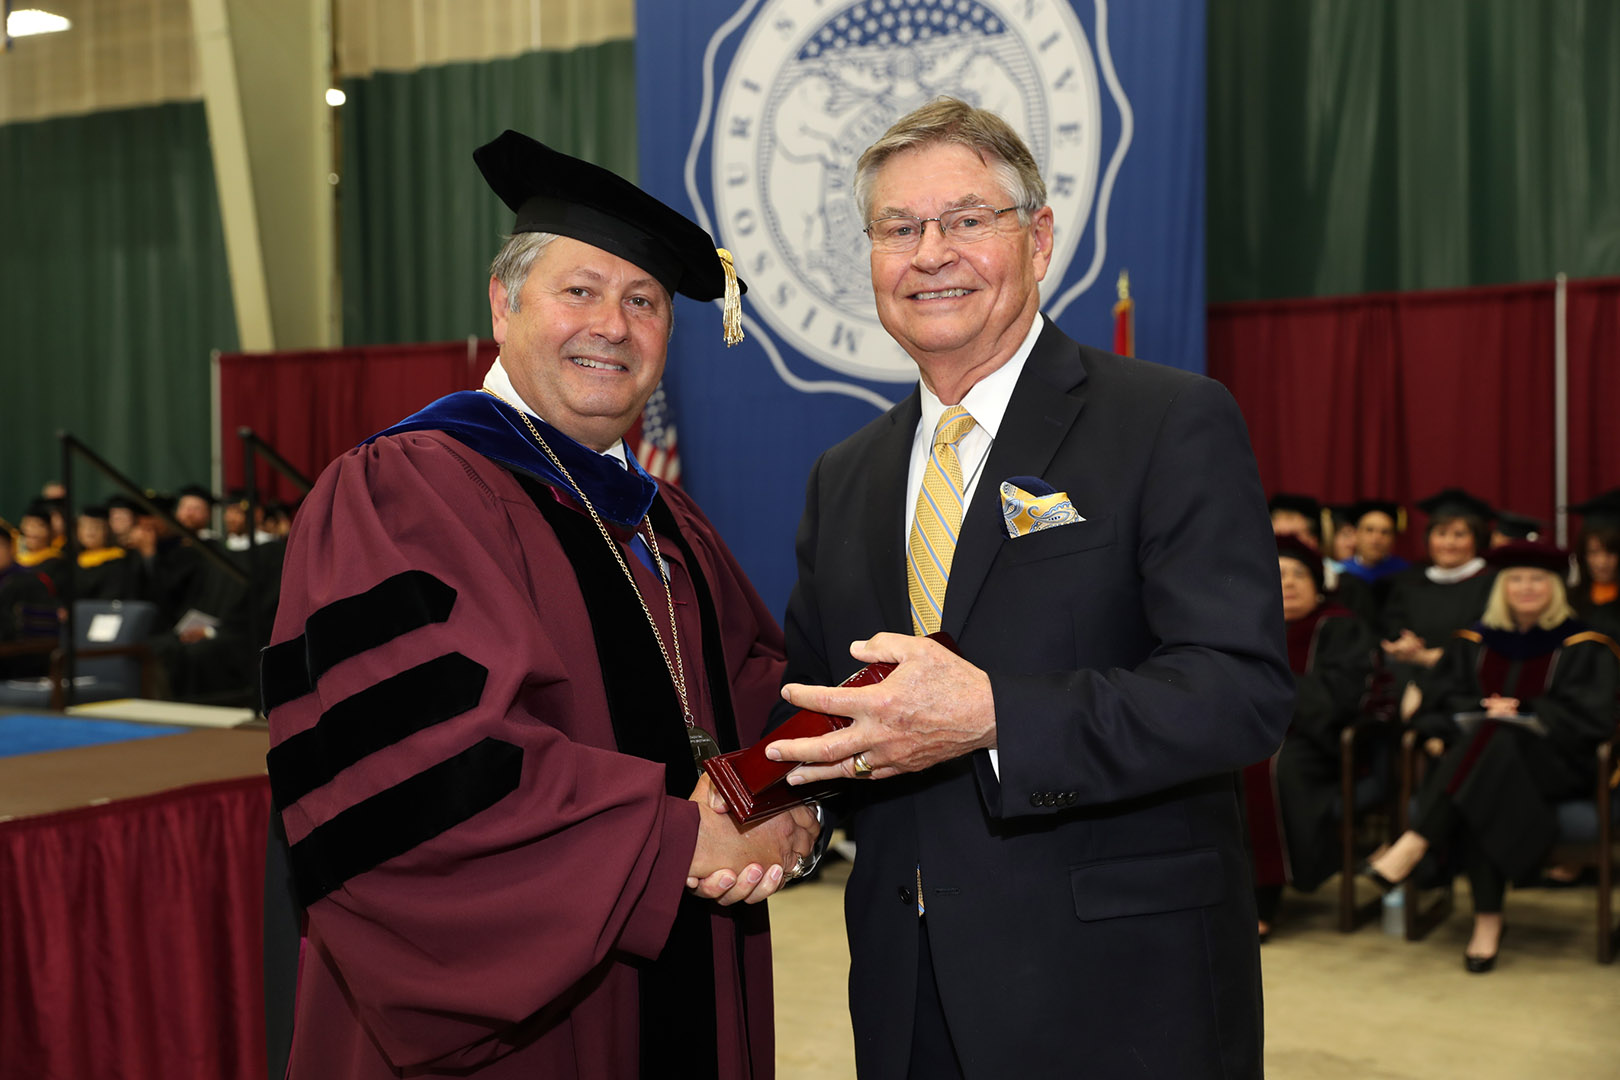 LONG-TIME WEST PLAINS BUSINESSMAN and community leader Jay Padgett, right, received the Granvil Vaughan Founder’s Award Saturday, May 20, during Missouri State University-West Plains’ commencement ceremony at the West Plains Civic Center arena. He received his award from Missouri State-West Plains Chancellor Drew Bennett. (Missouri State-West Plains)